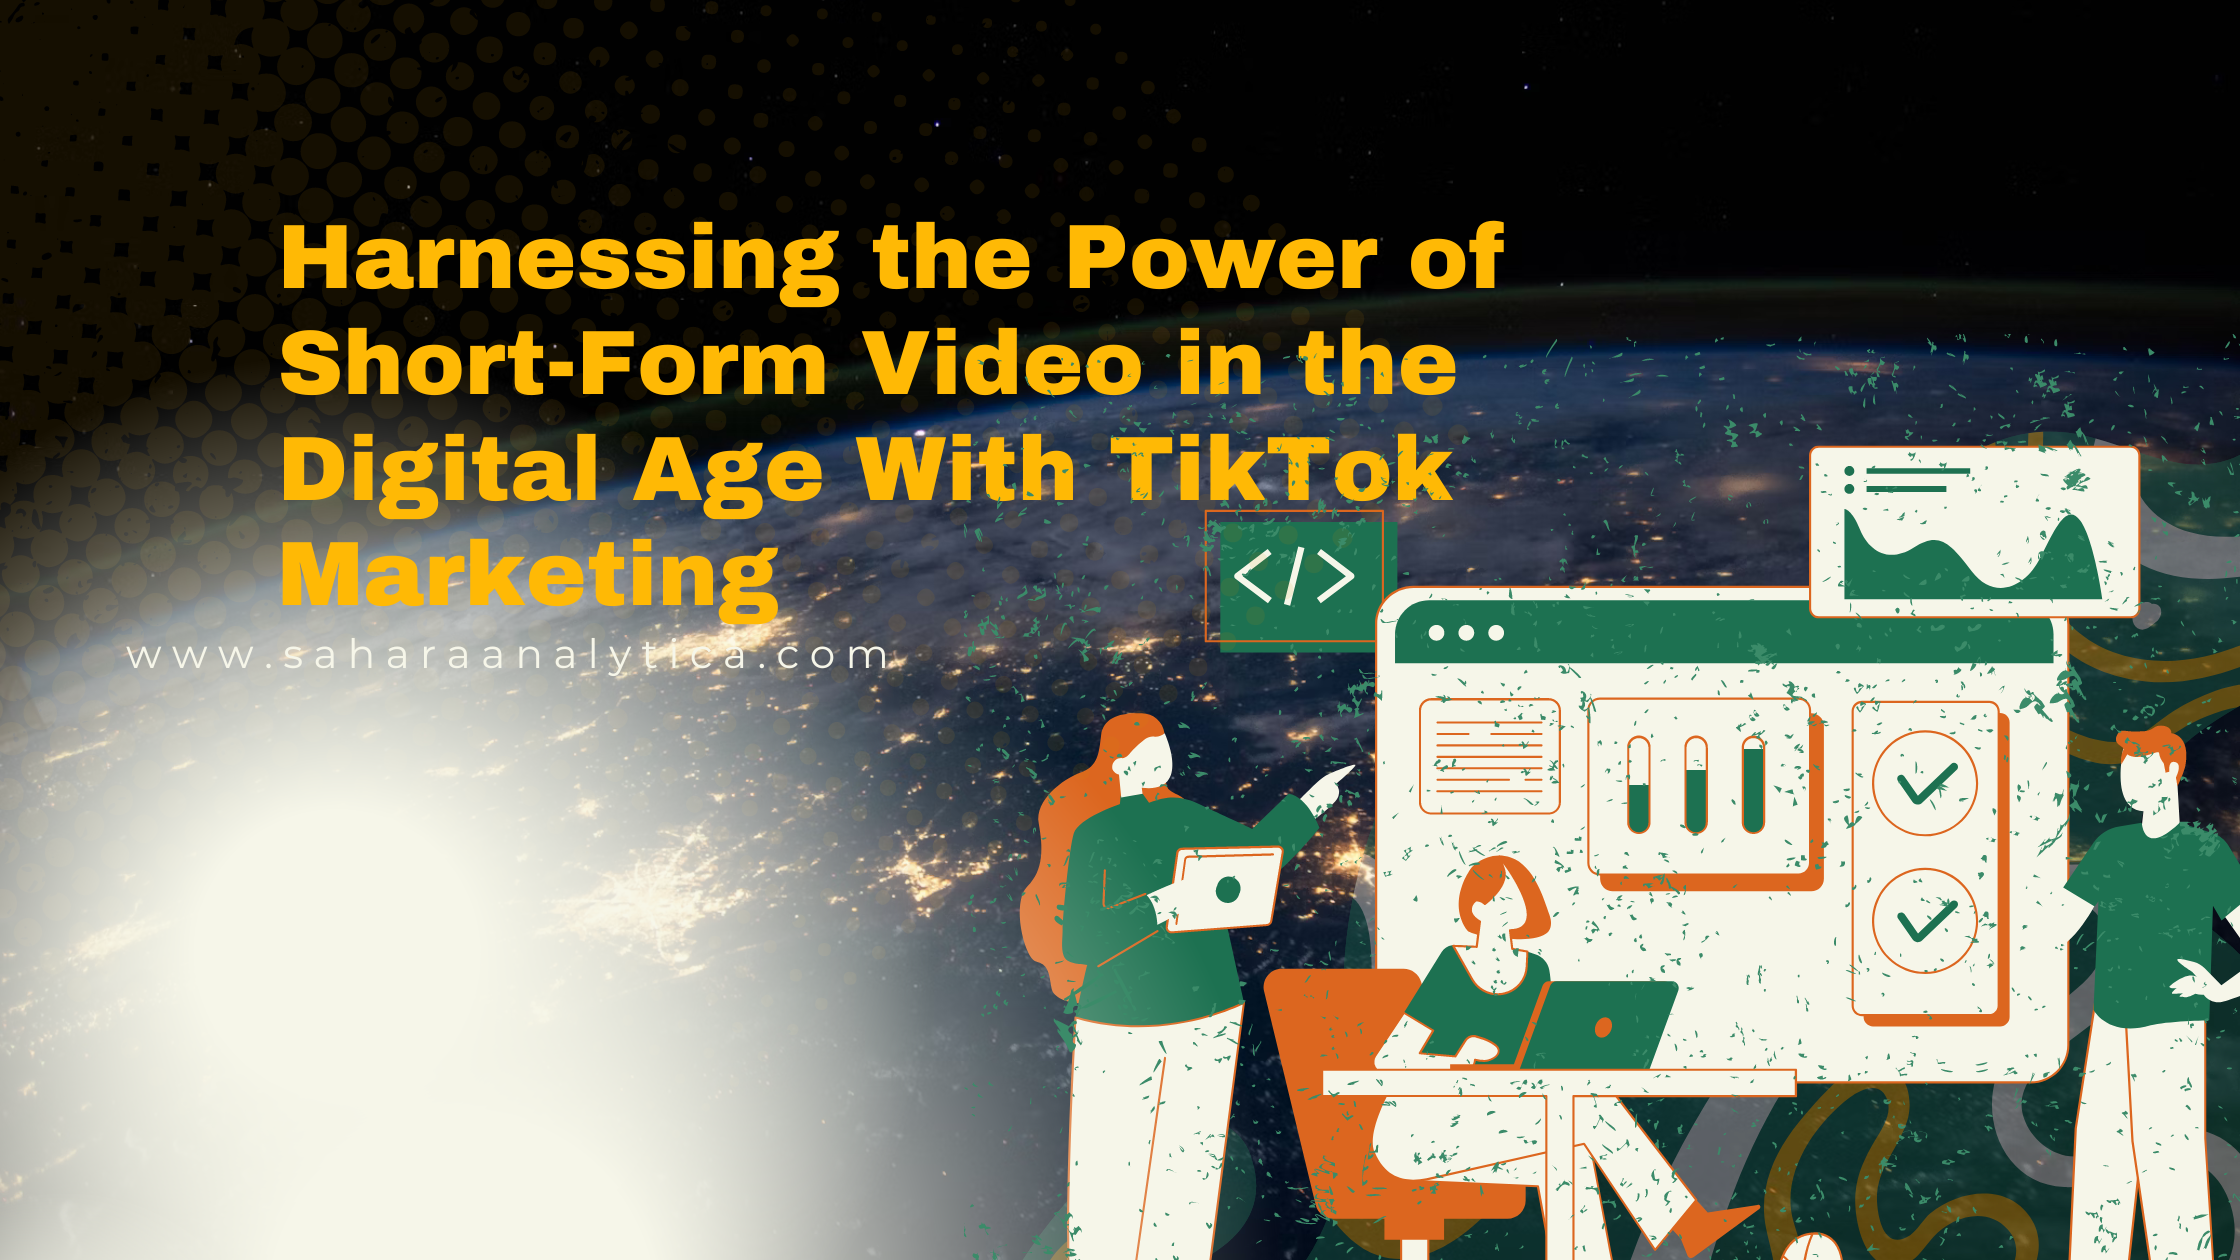 Harnessing the Power of Short-Form Video in the Digital Age With TikTok Marketing